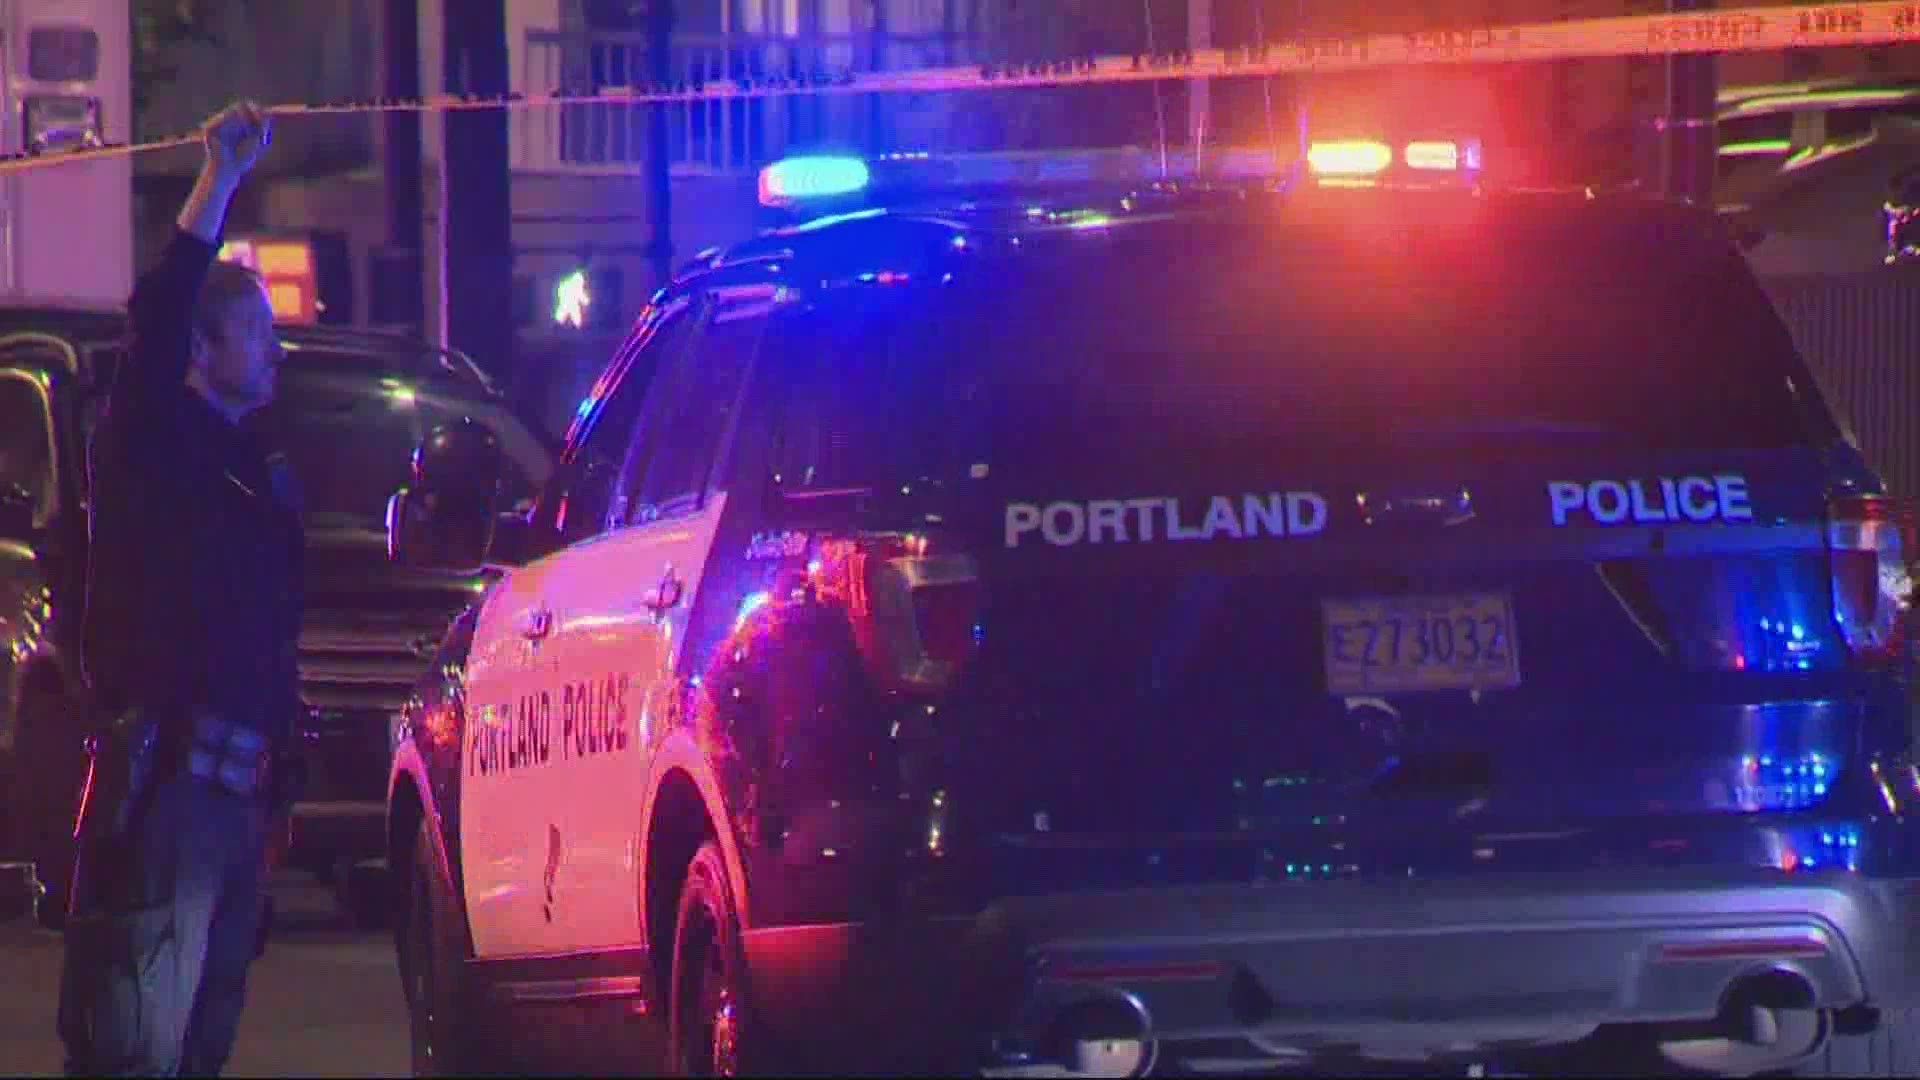 Four apartments and four vehicles were hit by gunfire and officers found more than 80 cartridge casings in a Northeast Portland neighborhood on July 3, 2021.